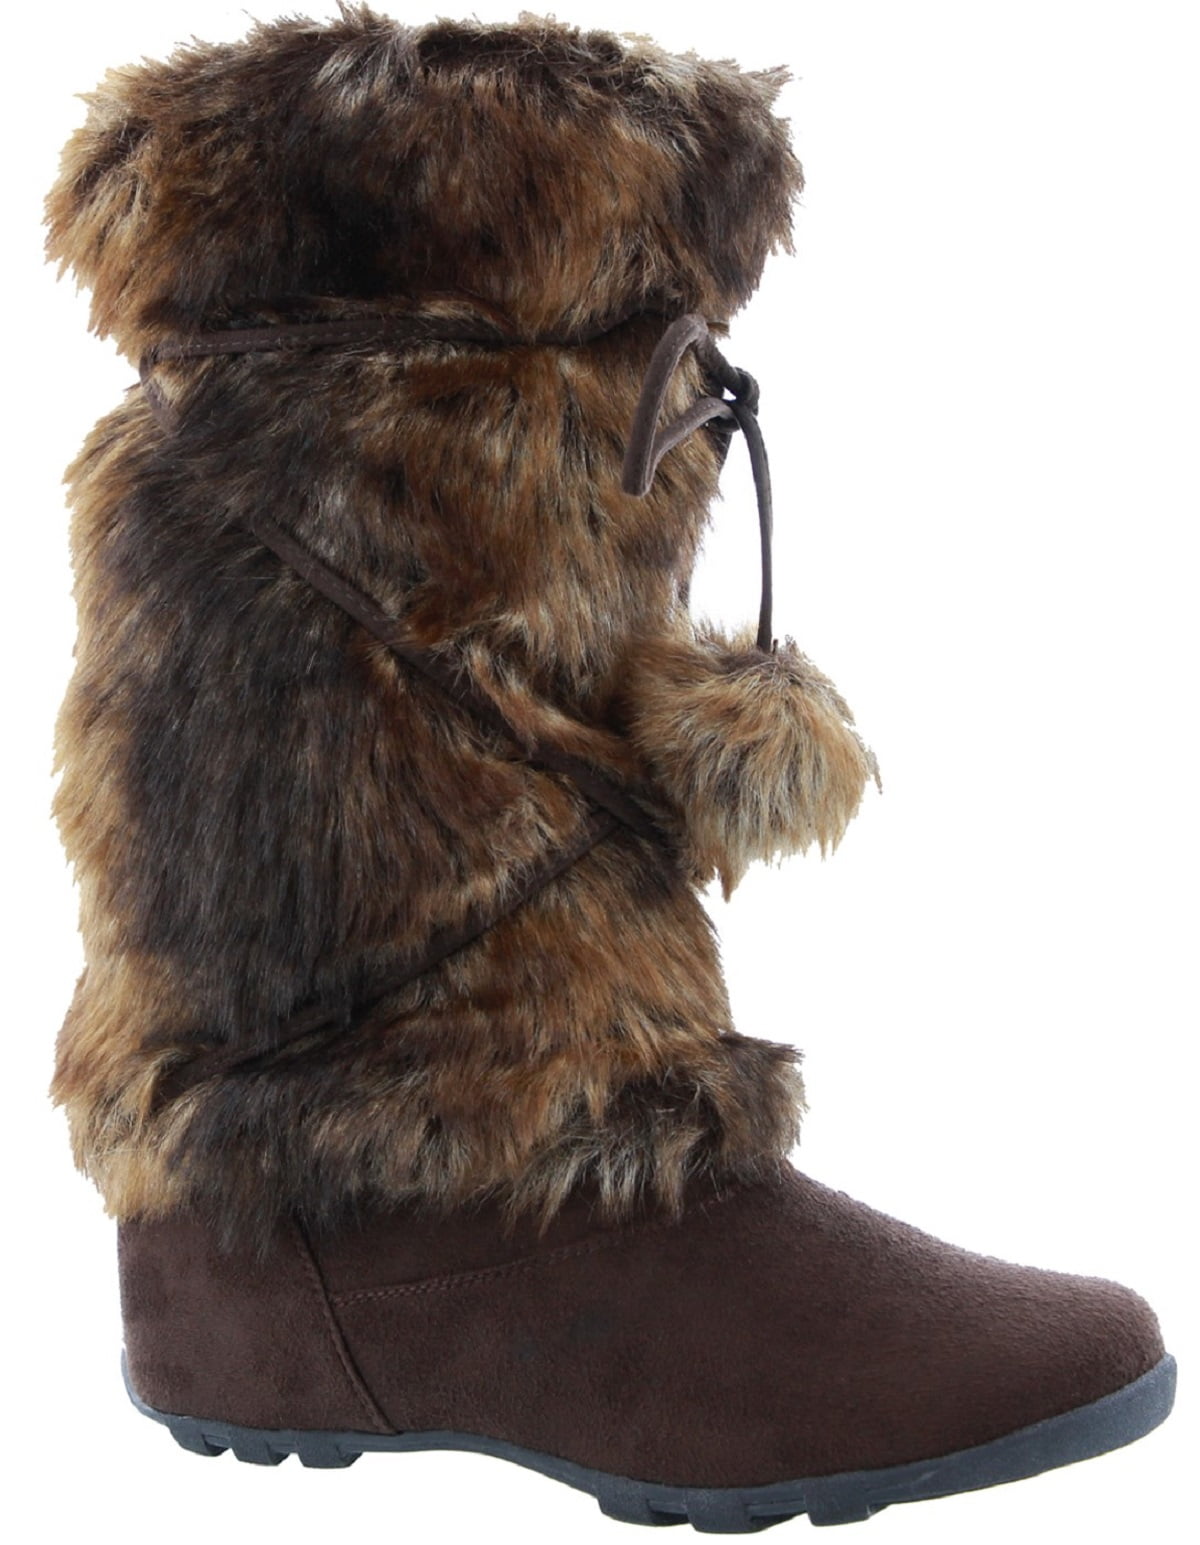 Genuine High Fur Winter boots,mukluks, Snow Furry Yeti Boots, Light Brown/White Colour Fur Boots